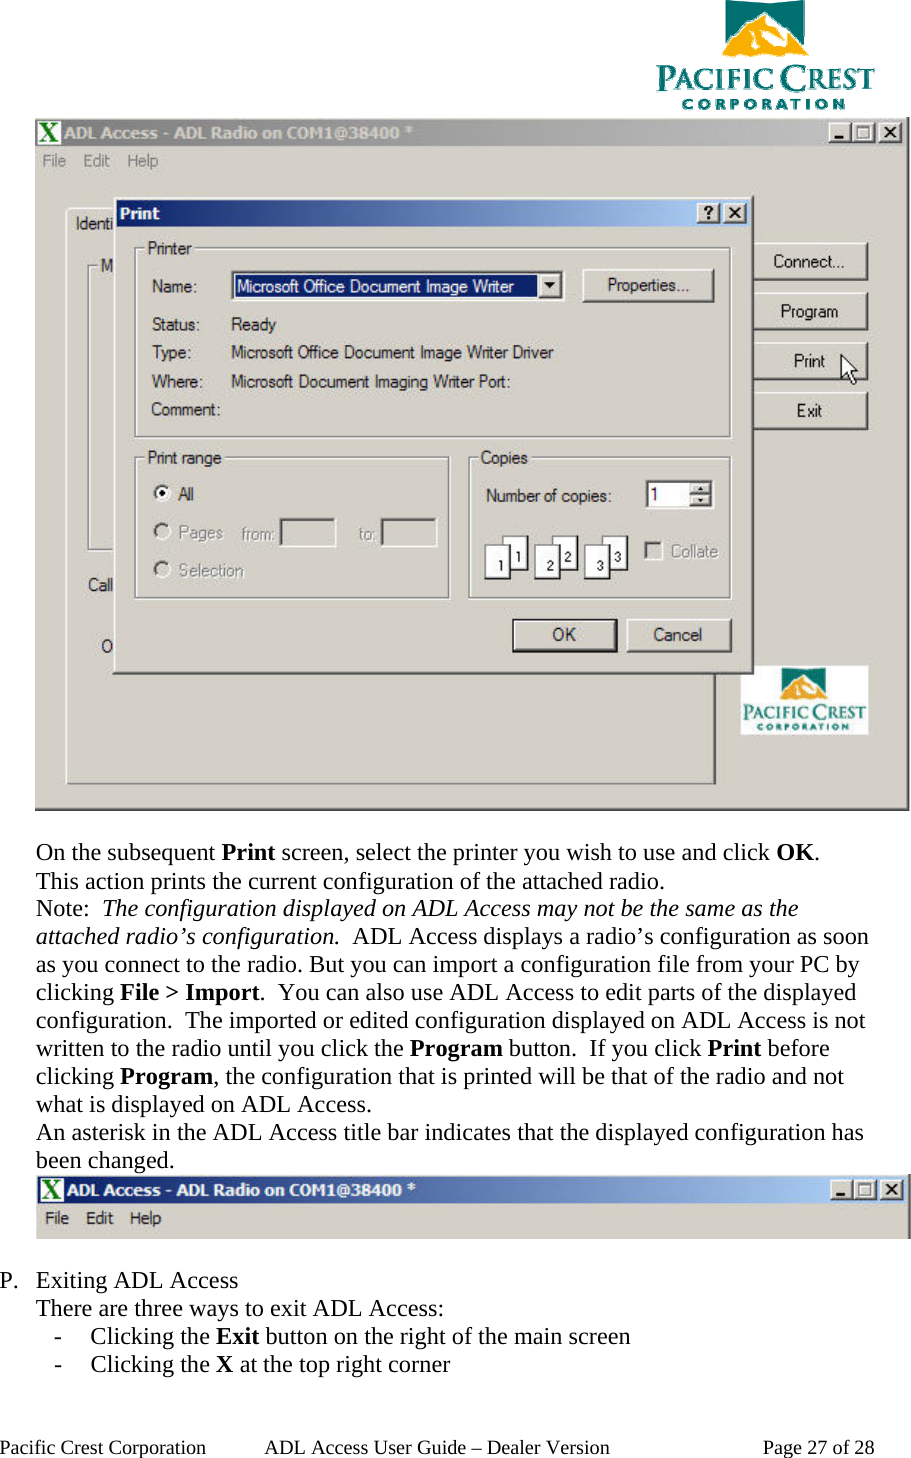  Pacific Crest Corporation  ADL Access User Guide – Dealer Version  Page 27 of 28   On the subsequent Print screen, select the printer you wish to use and click OK. This action prints the current configuration of the attached radio.  Note:  The configuration displayed on ADL Access may not be the same as the attached radio’s configuration.  ADL Access displays a radio’s configuration as soon as you connect to the radio. But you can import a configuration file from your PC by clicking File &gt; Import.  You can also use ADL Access to edit parts of the displayed configuration.  The imported or edited configuration displayed on ADL Access is not written to the radio until you click the Program button.  If you click Print before clicking Program, the configuration that is printed will be that of the radio and not what is displayed on ADL Access. An asterisk in the ADL Access title bar indicates that the displayed configuration has been changed.   P. Exiting ADL Access There are three ways to exit ADL Access: - Clicking the Exit button on the right of the main screen - Clicking the X at the top right corner 